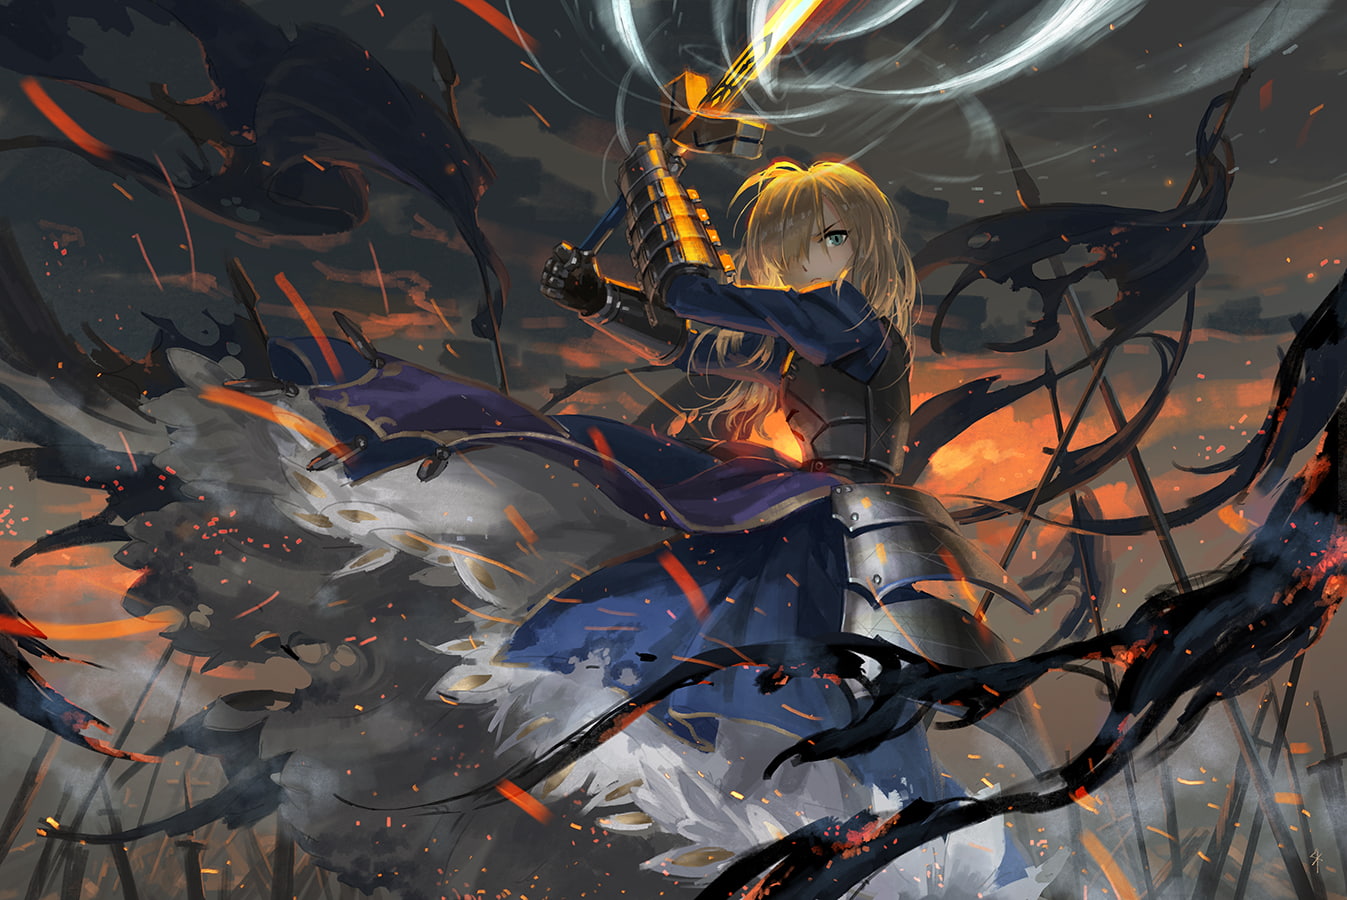 Fate Series, Fate/Stay Night, Armor, Blonde, Excalibur, Saber (Fate Series)